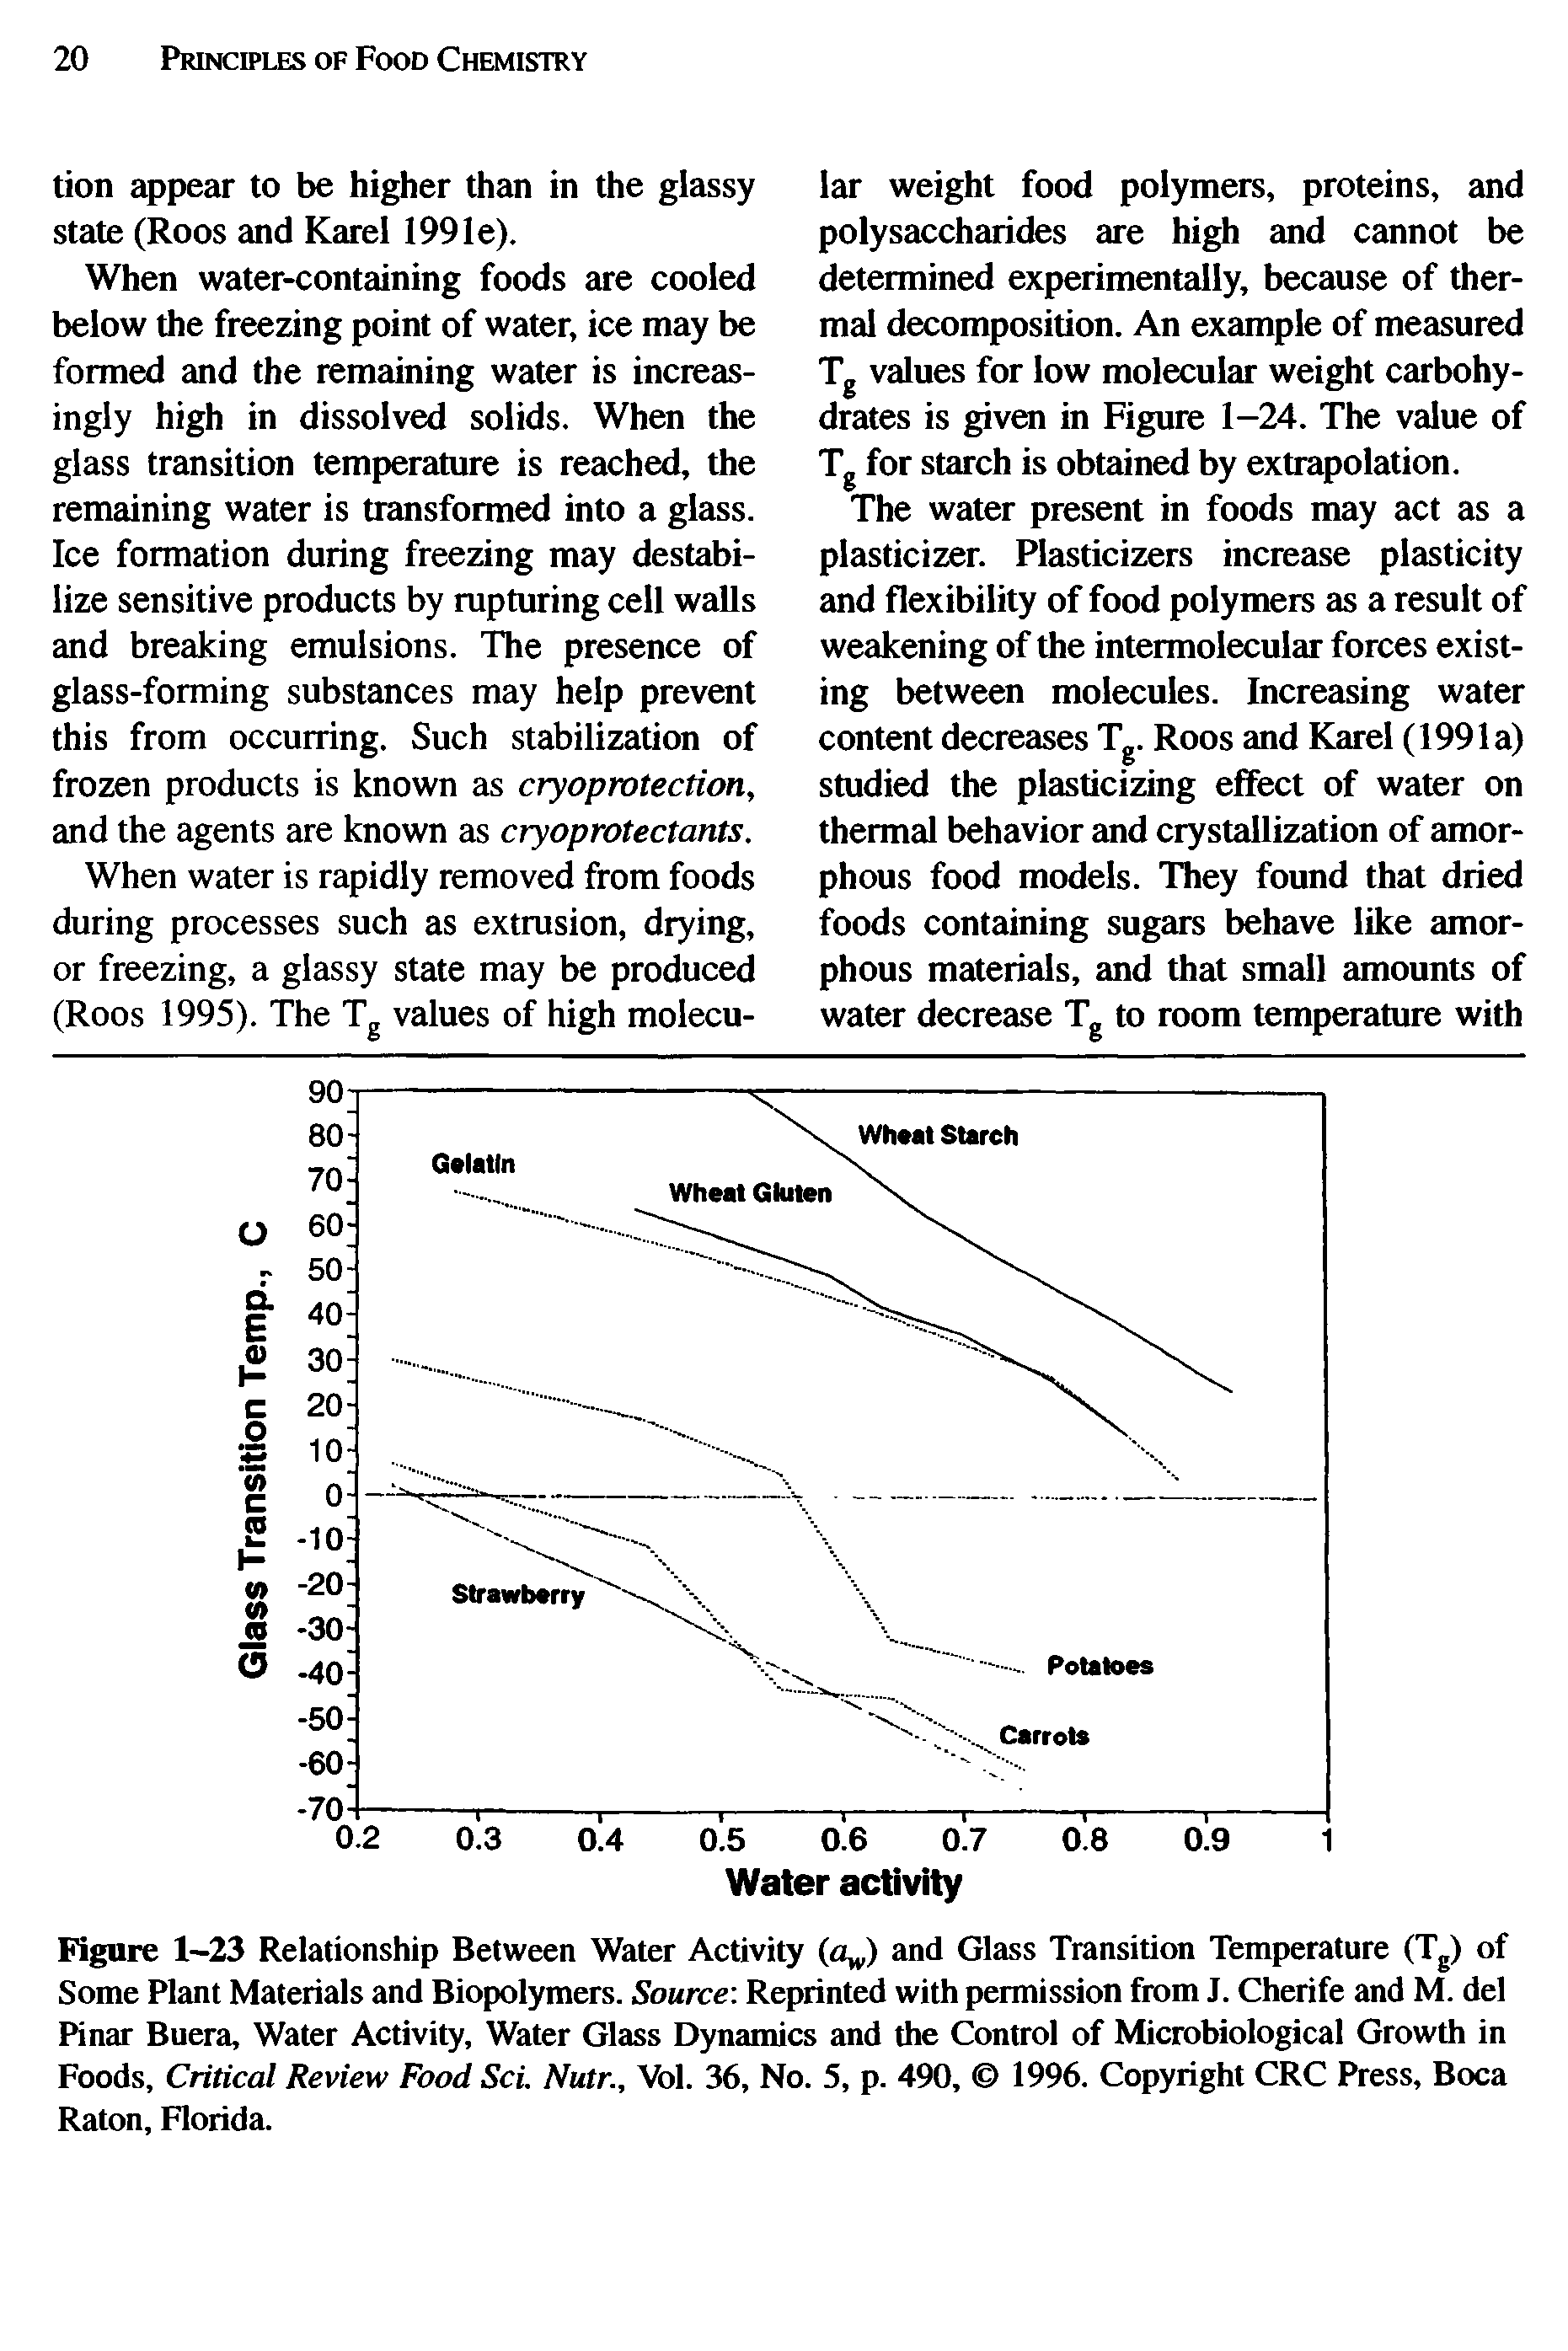 Figure 1-23 Relationship Between Water Activity aw) and Glass Transition Temperature (Tg) of Some Plant Materials and Biopolymers. Source Reprinted with permission from J. Cherife and M. del Pinar Buera, Water Activity, Water Glass Dynamics and the Control of Microbiological Growth in Foods, Critical Review Food Sci. Nutr., Vol. 36, No. 5, p. 490, 1996. Copyright CRC Press, Boca Raton, Florida.